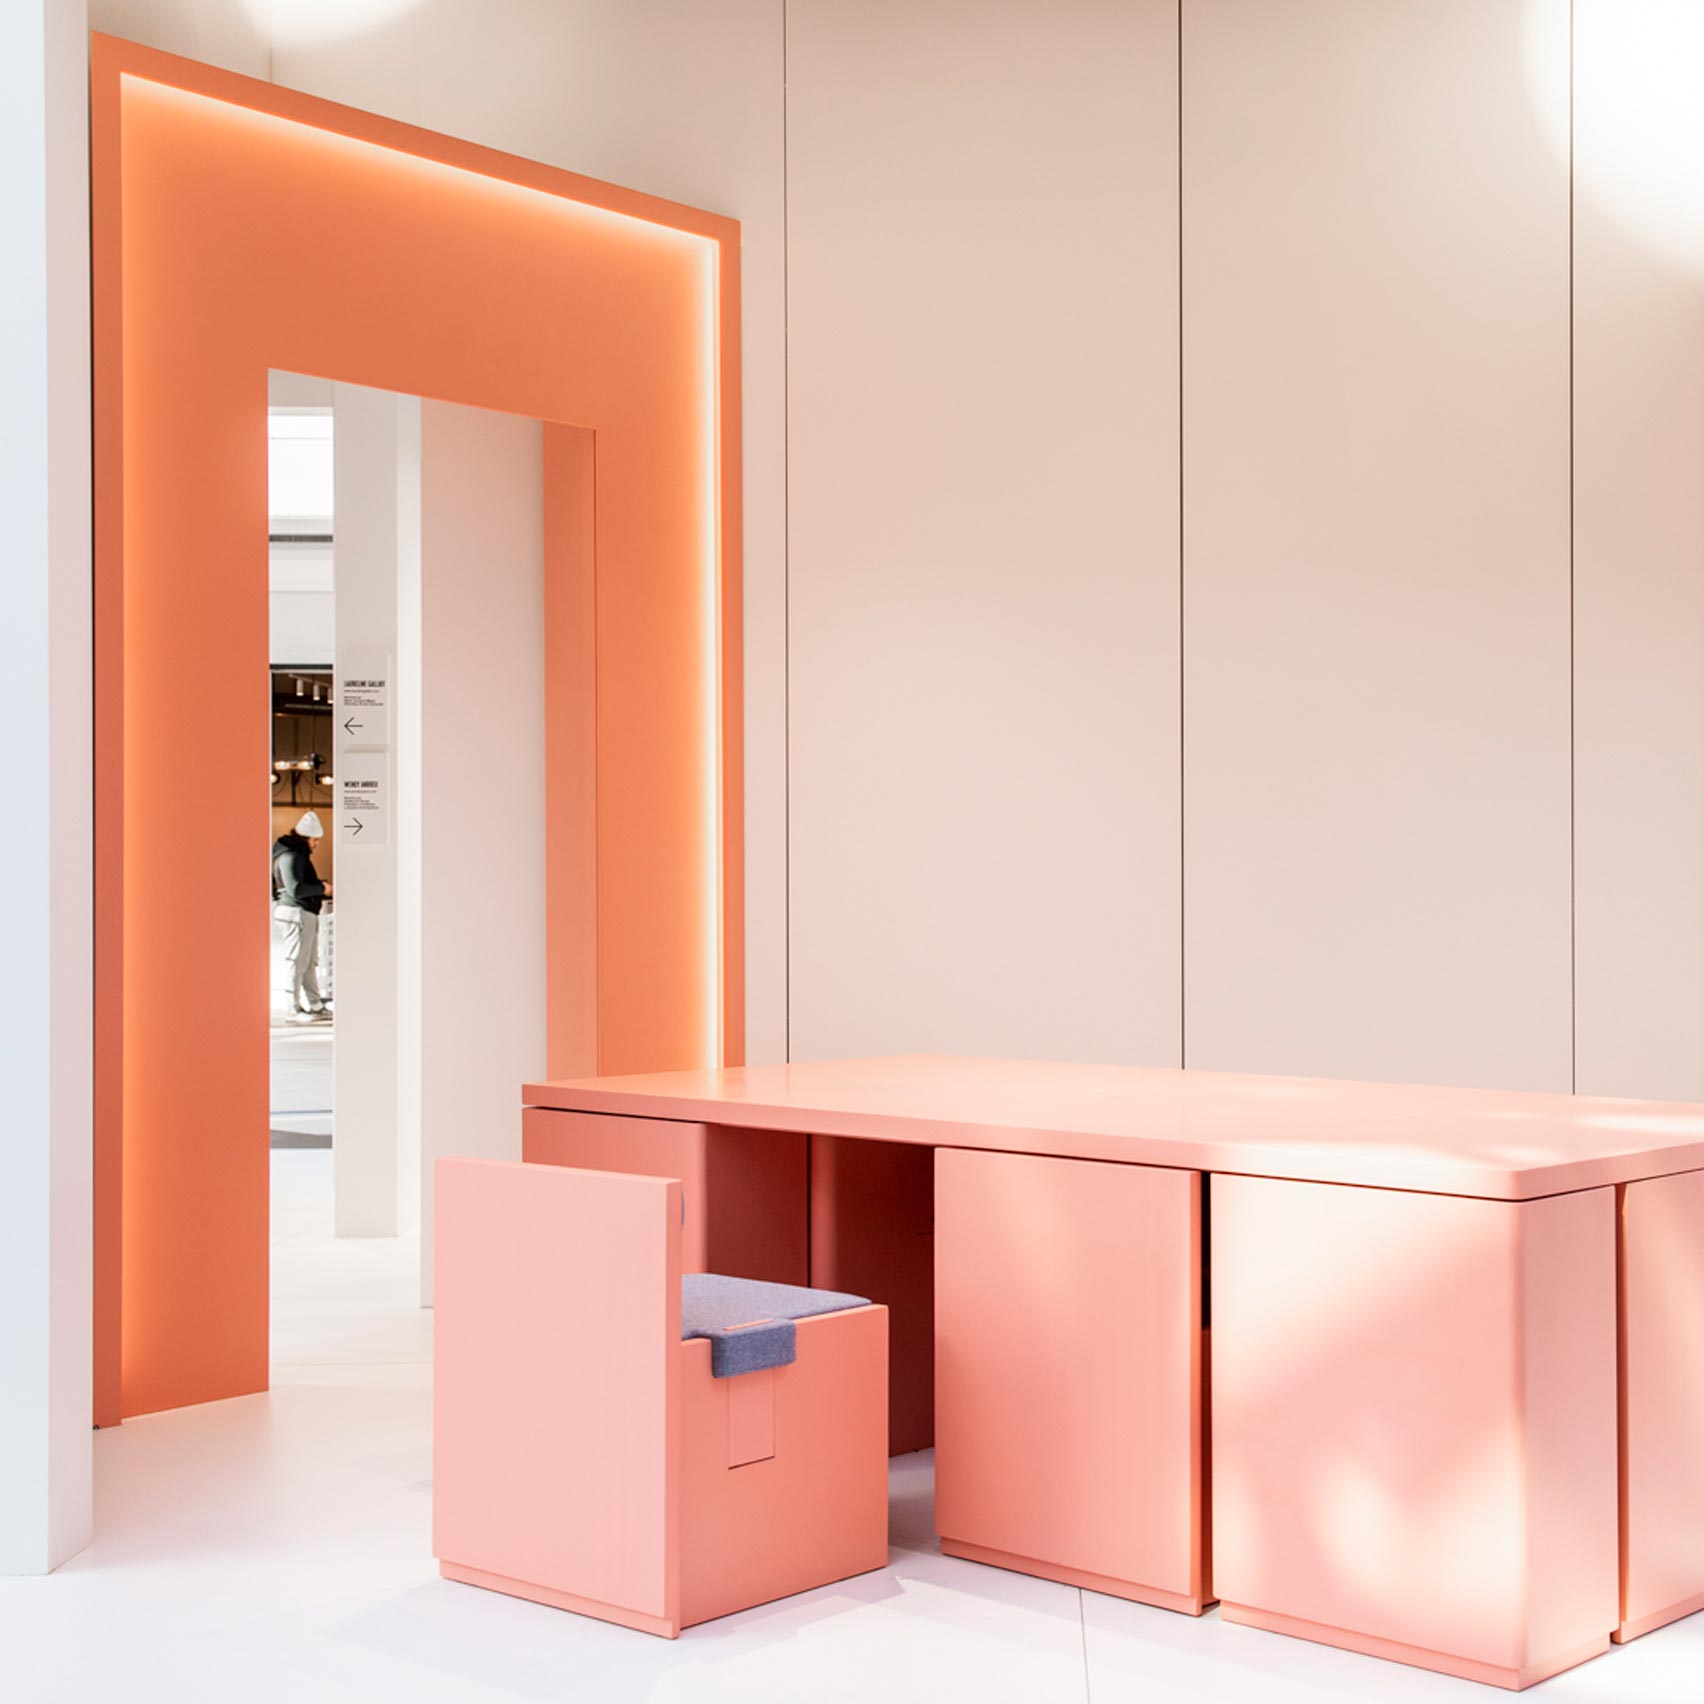 Adrien Garcia is among French designers in the Rising Talents at Maison&Objet 2020